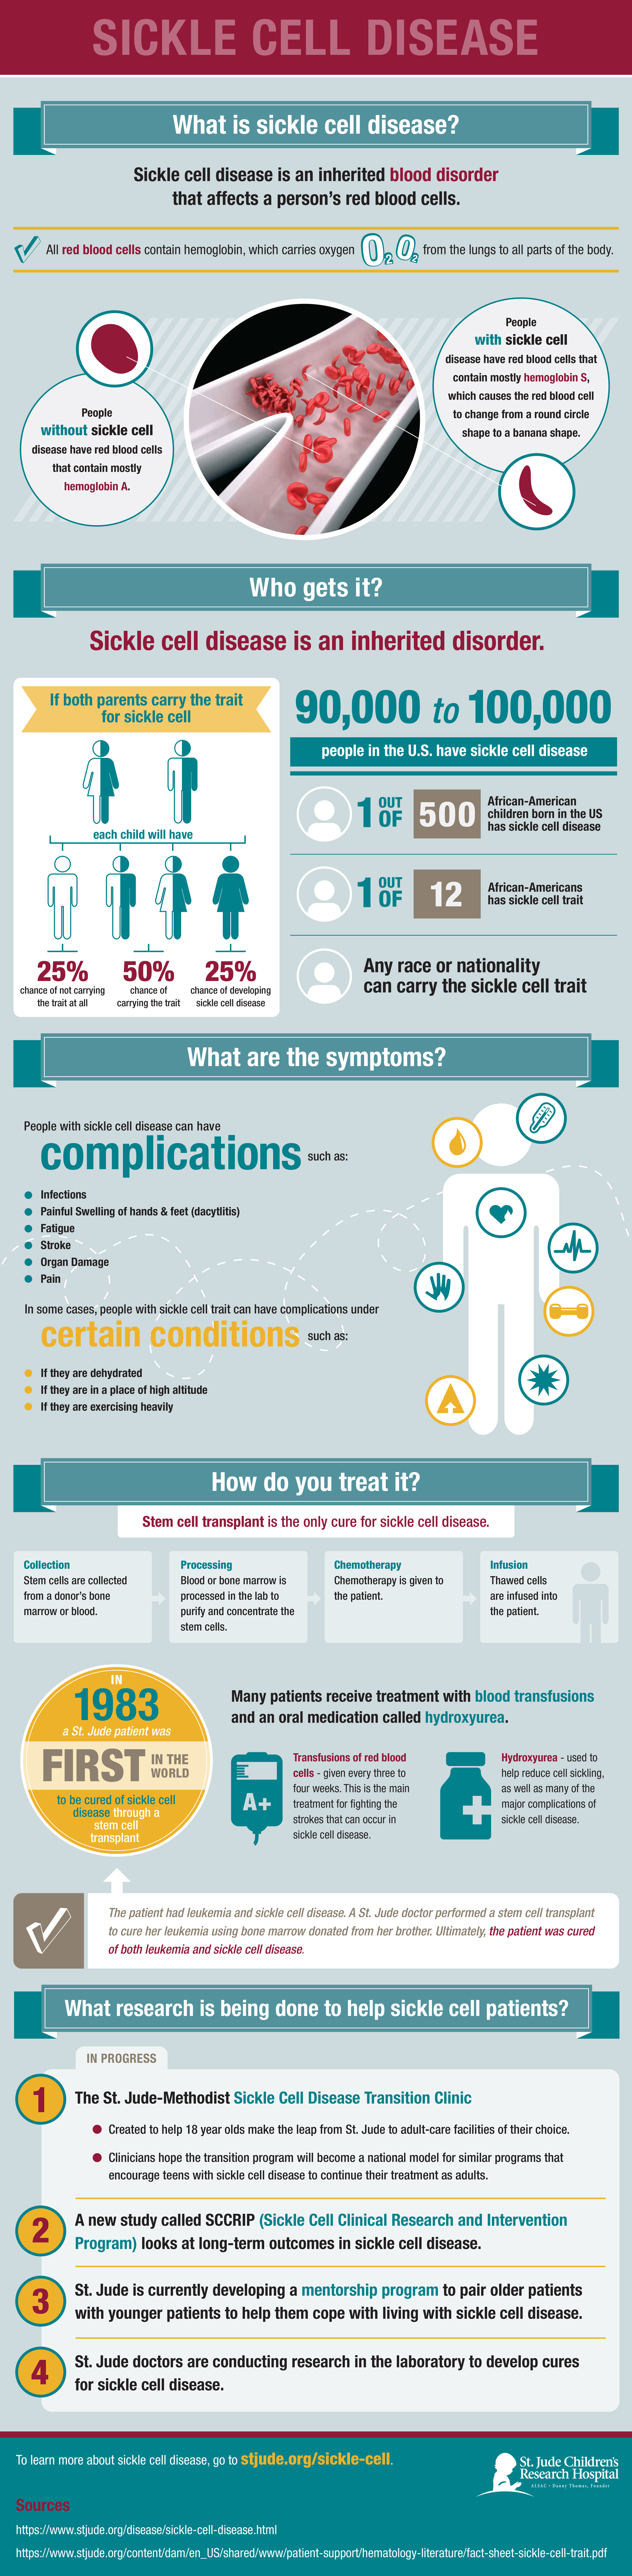 sickle-cell-disease-infographic